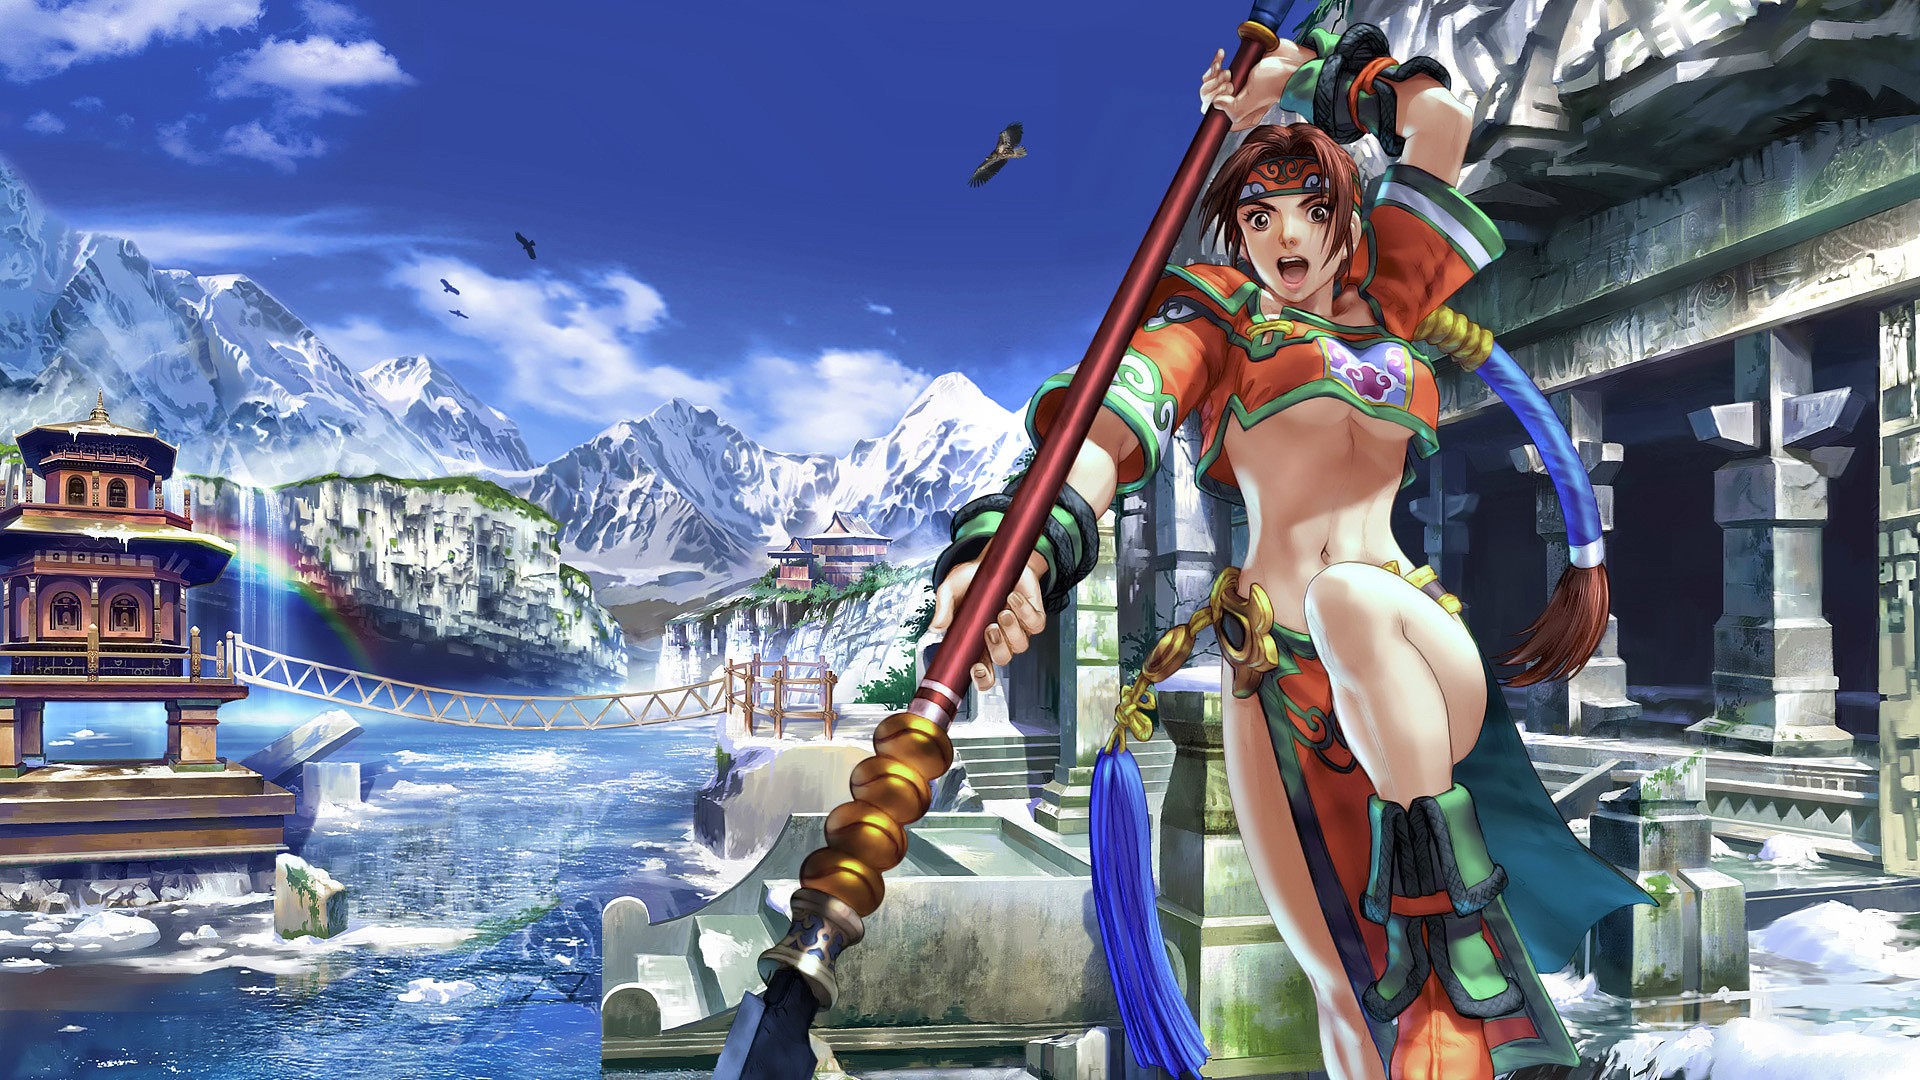 General 1920x1080 video games soul calibur artwork Seong Mina (Soul Calibur) video game girls video game warriors women underboob belly open mouth video game characters video game landscape